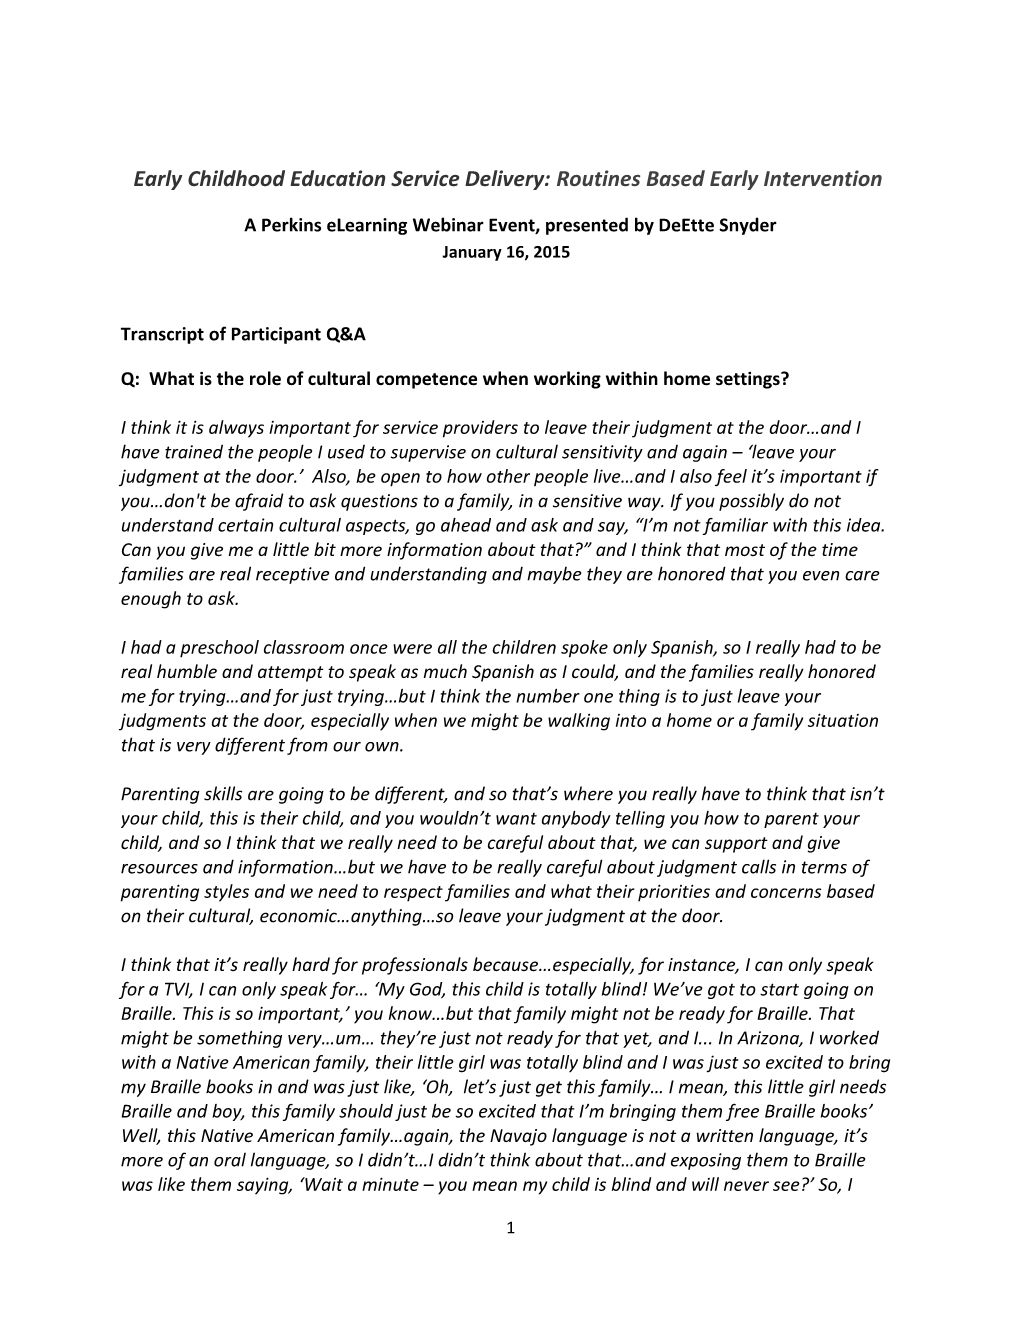 Early Childhood Education Service Delivery:Routines Based Early Intervention